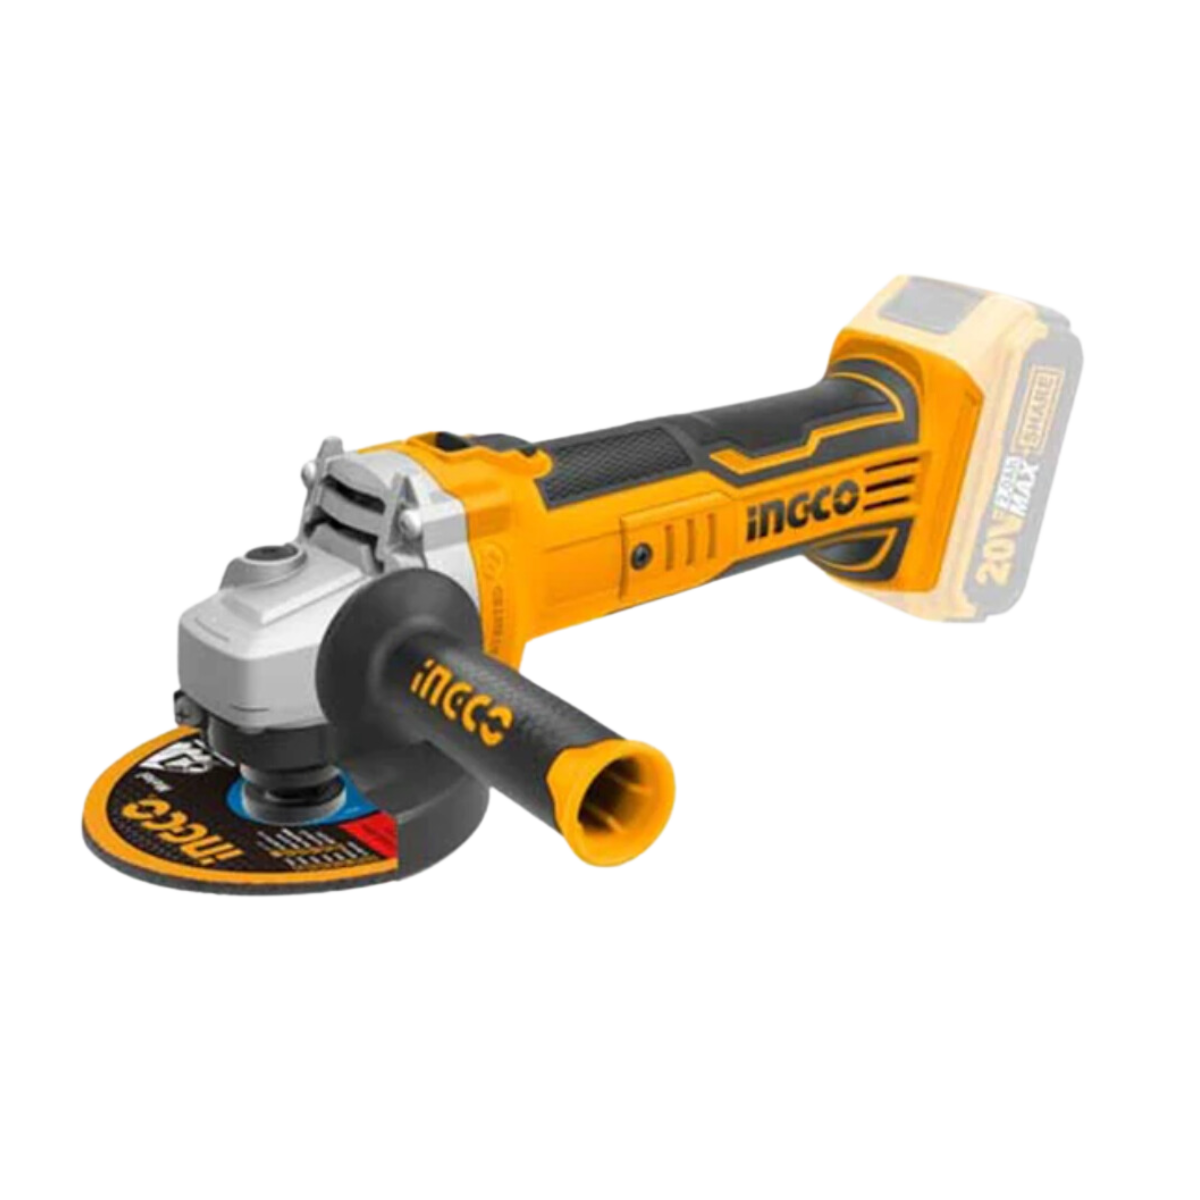 INGCO CAGLI1151 ANGLE GRINDER LITHIUM ION